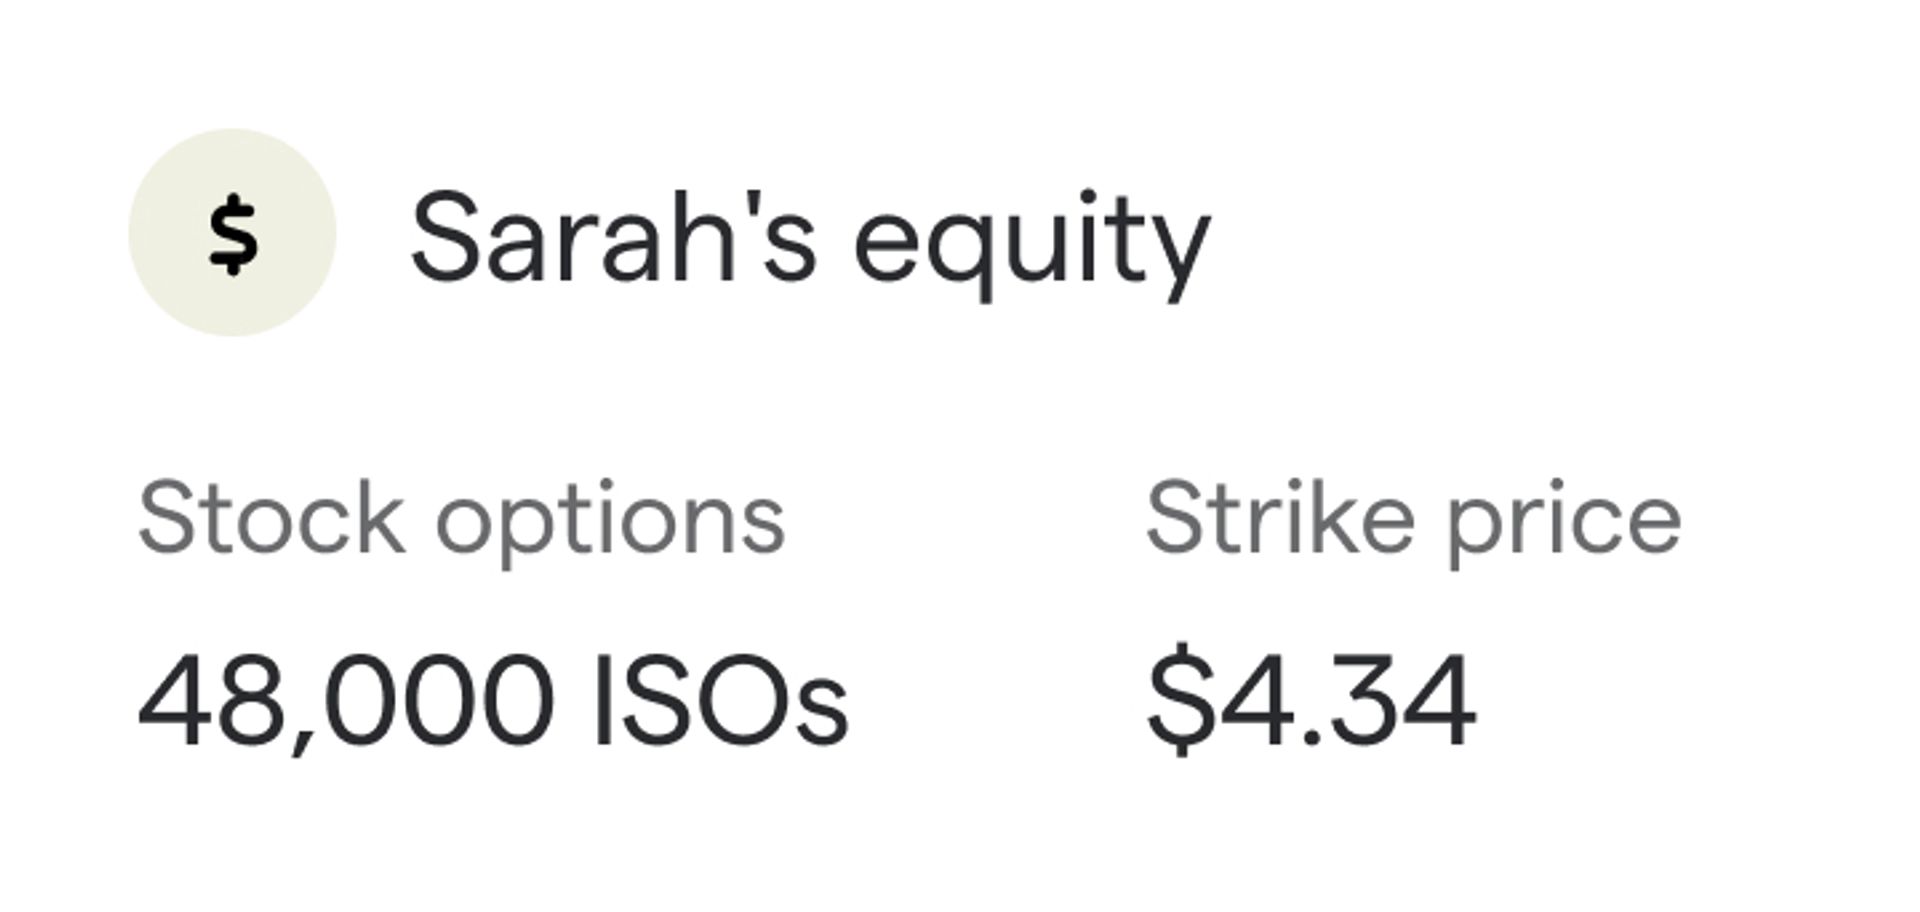 Sarah has 48,000 incentive stock options with a strike price of $4.34.